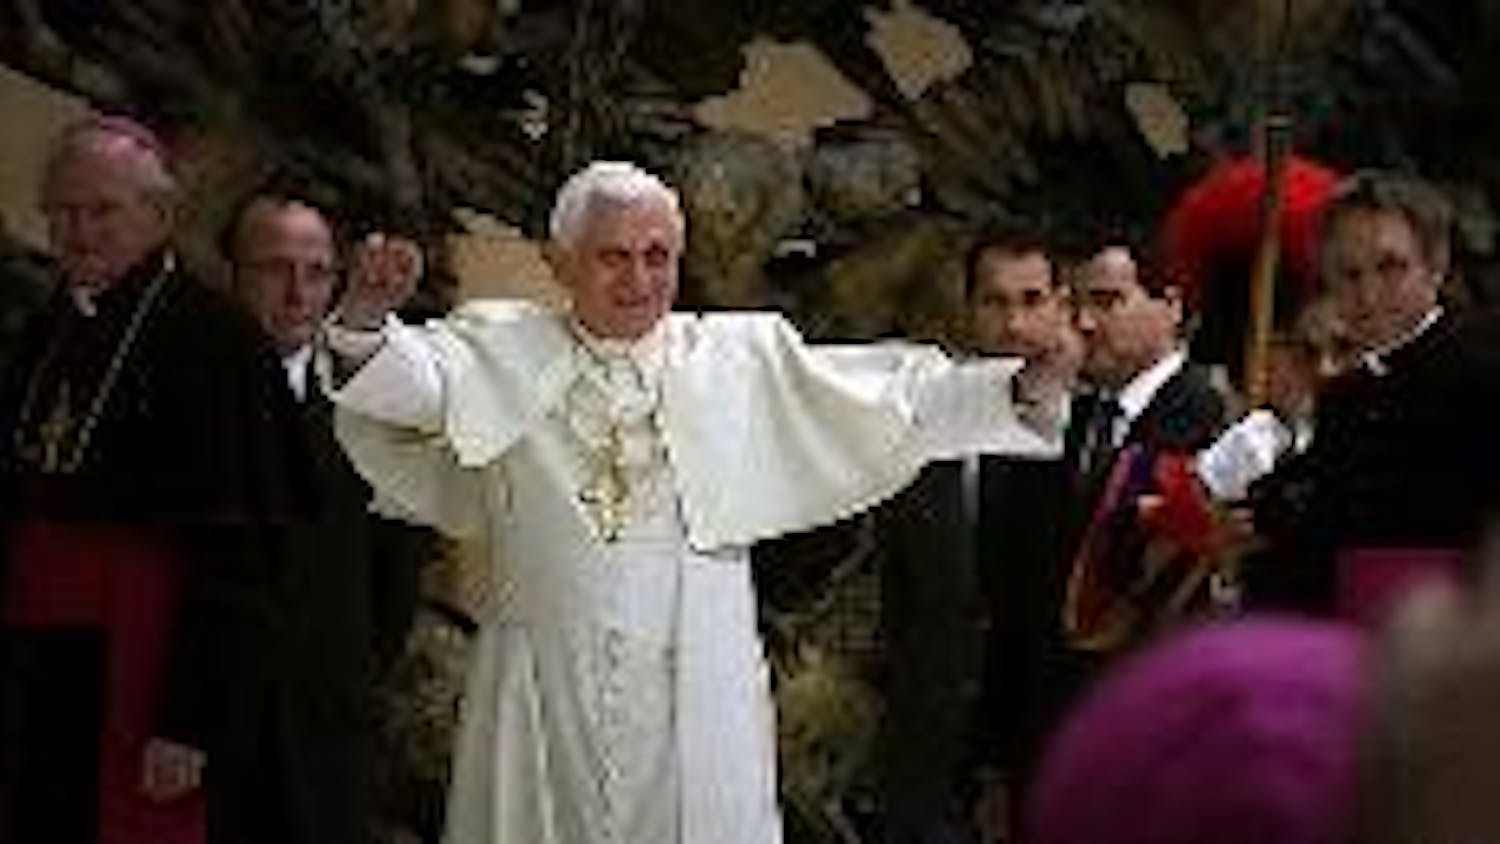 PONTIFICATING- Pope Benedict XVI will make his first visit to the United States next week since he was elected pope in April 2005. Forty AU students were able to get tickets to see him say Mass at Nationals Park on April 17, and others can see him as he l